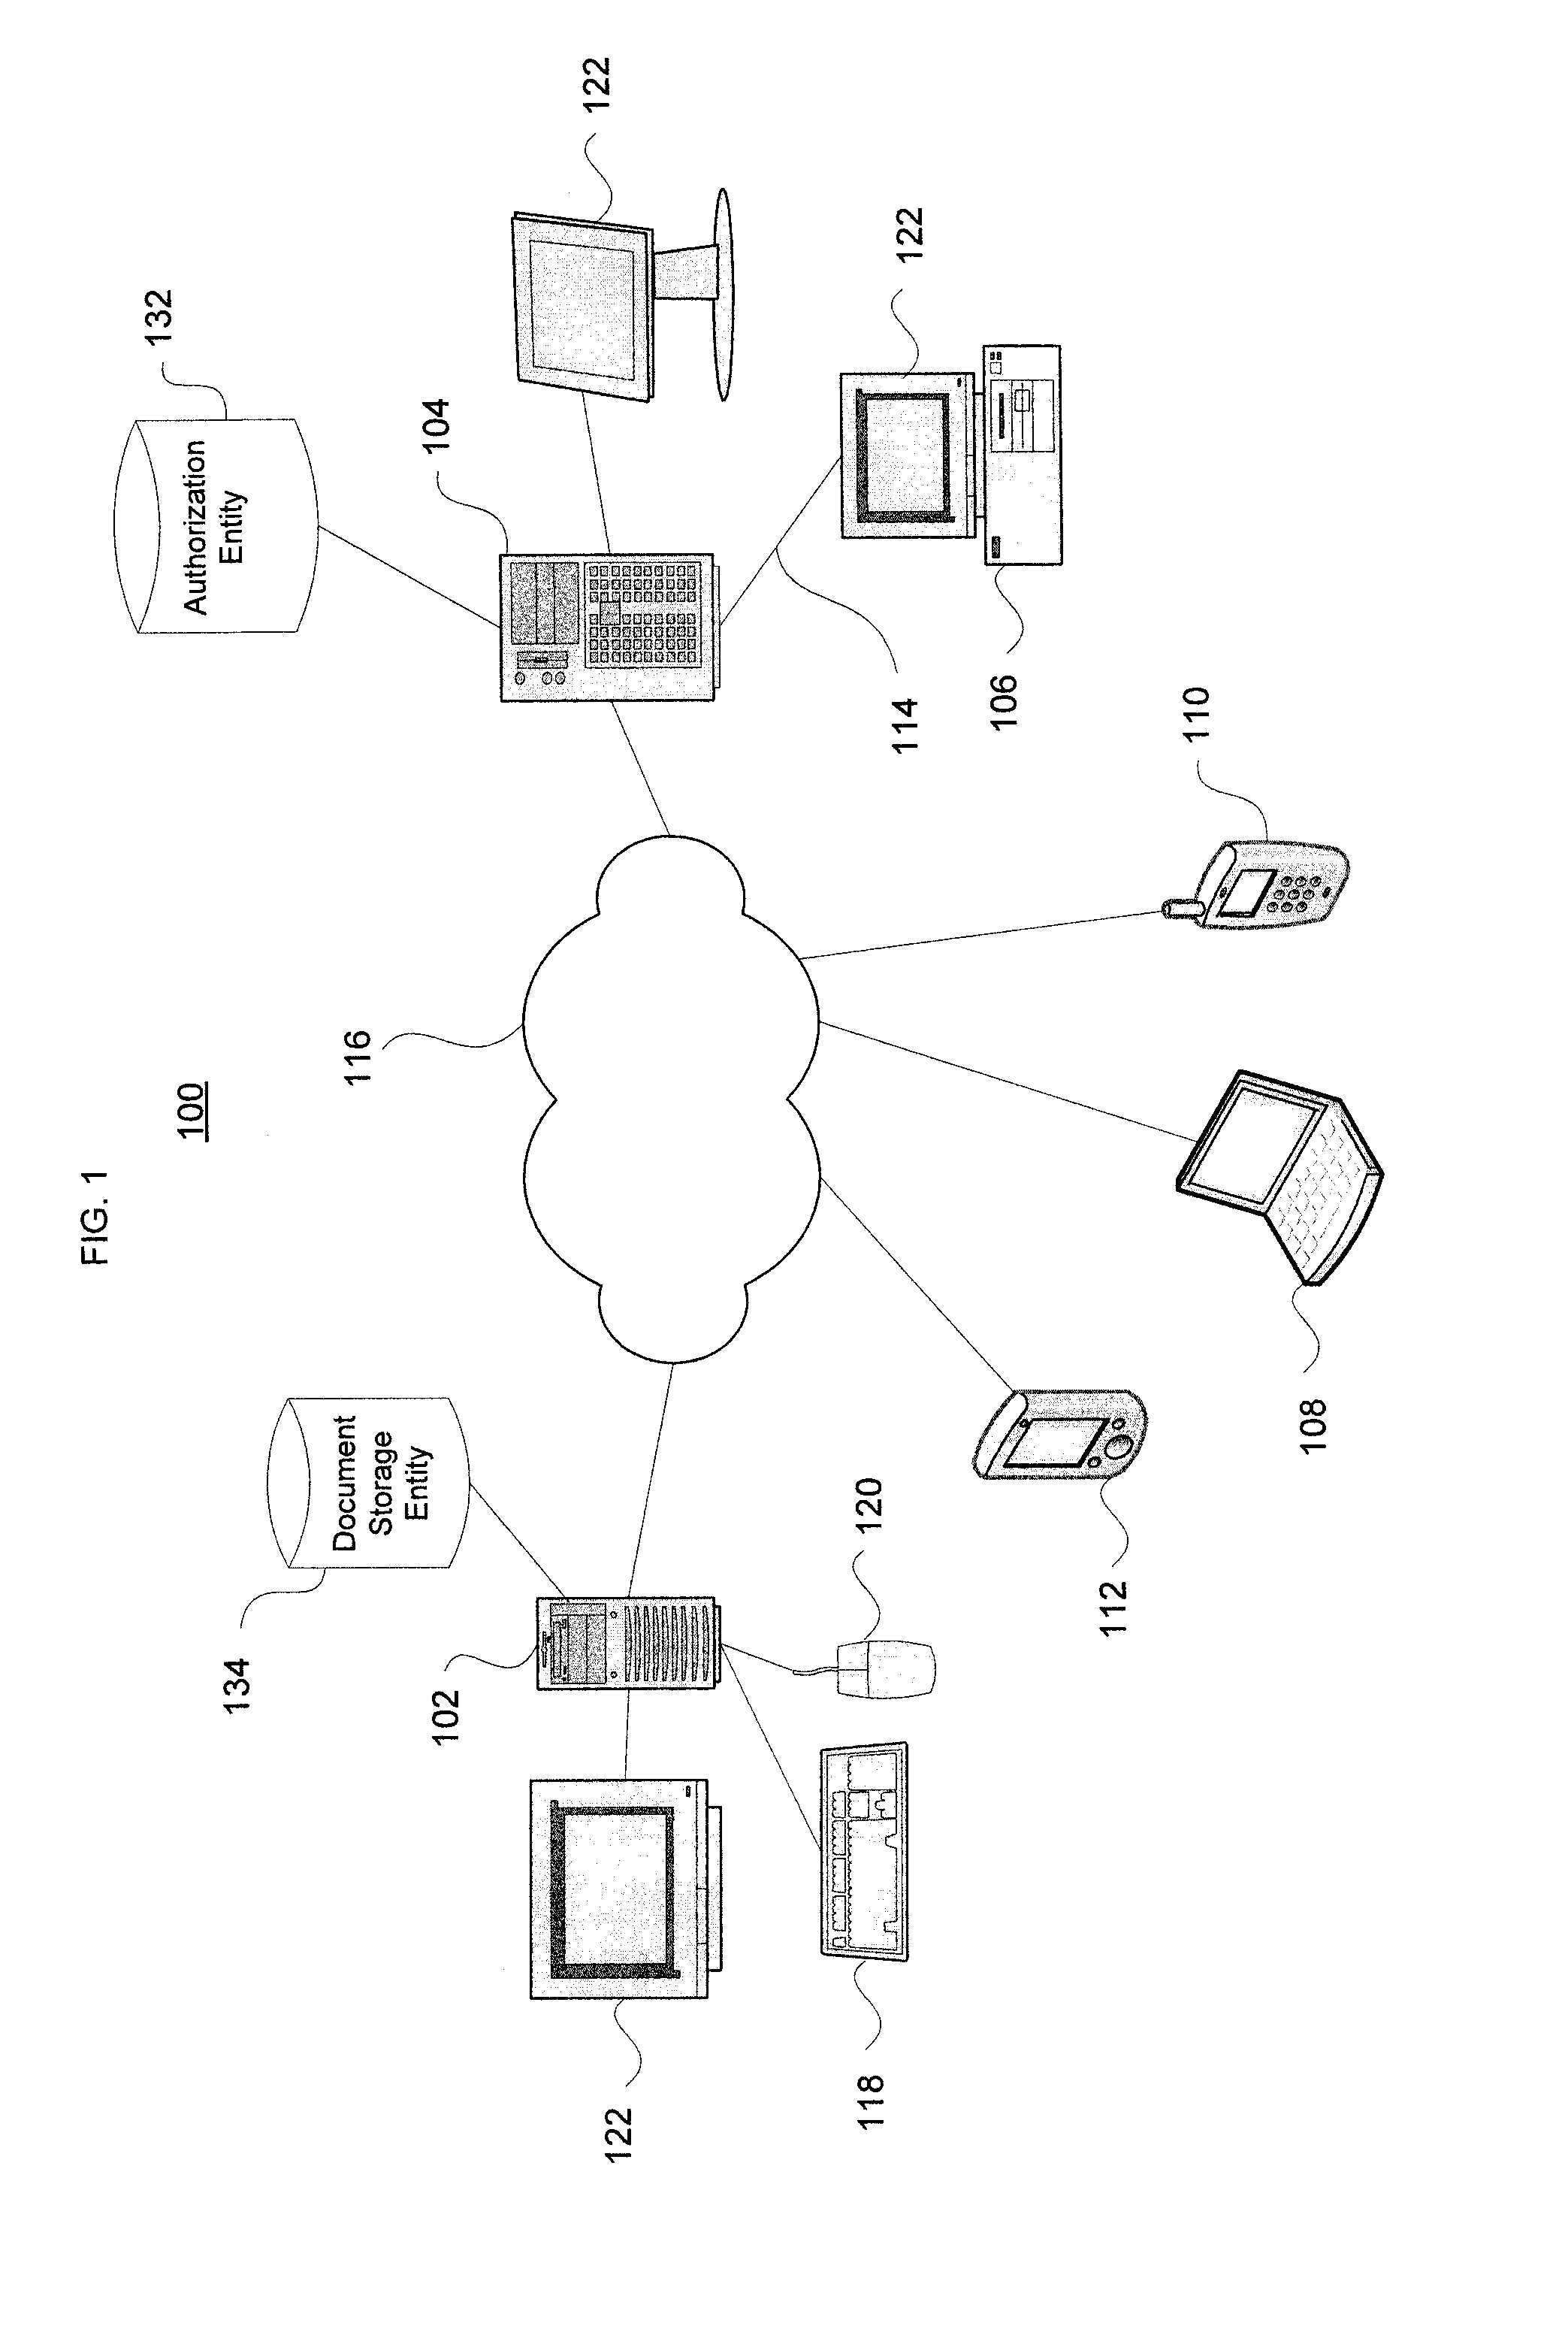 Systems and methods for verifying an electronic documents provenance date